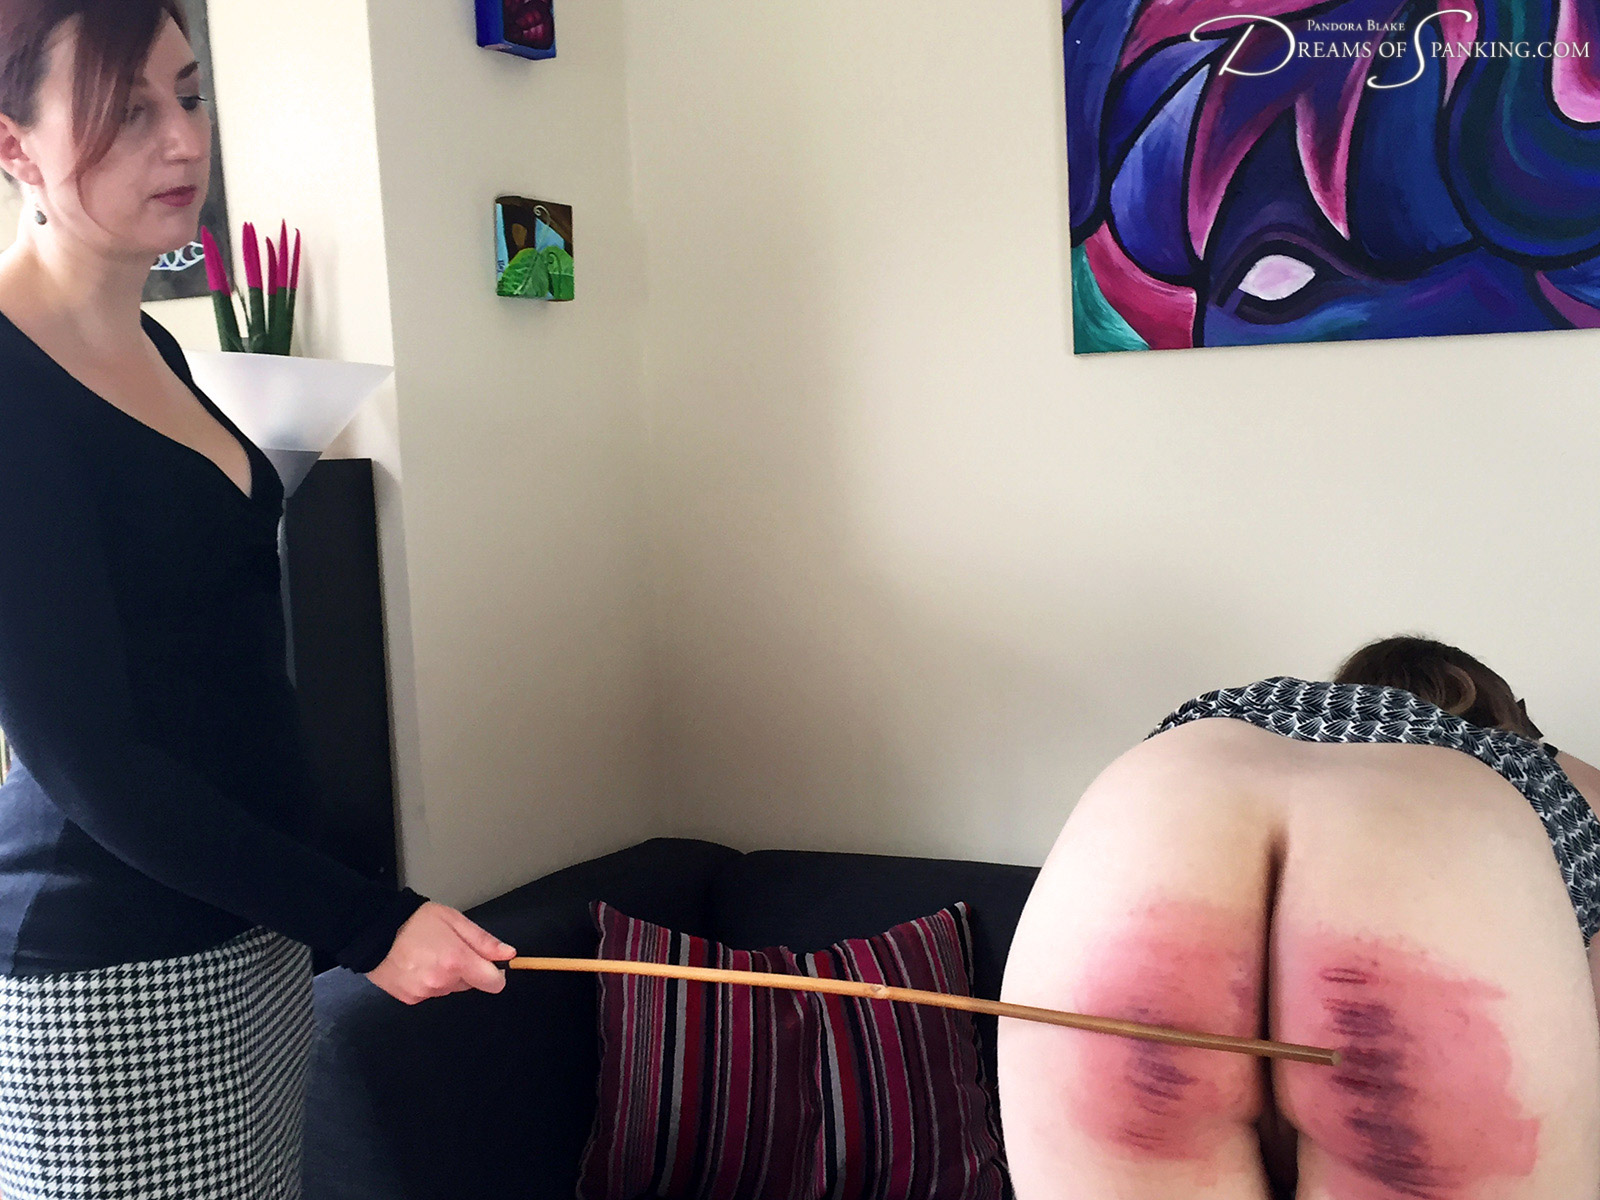 Dreams-of-Spanking_caned-at-home022.jpg